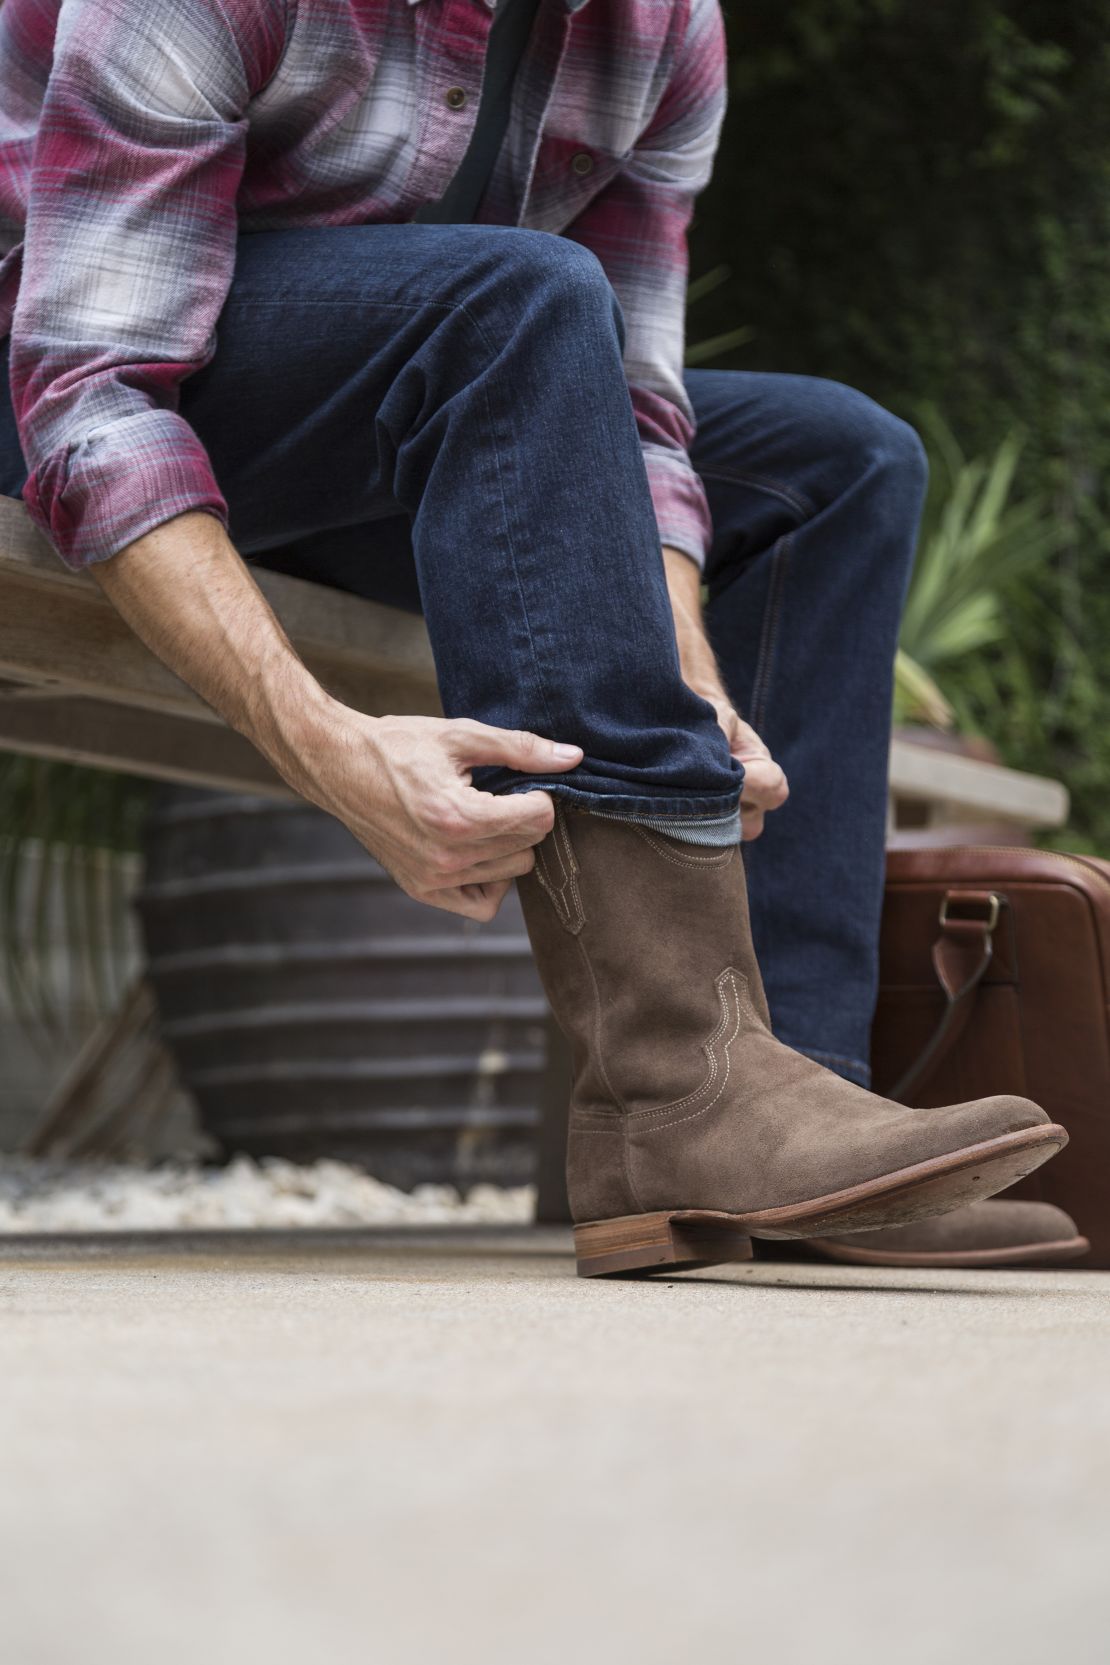 How To Wear Cowboy Boots Like a Real Man